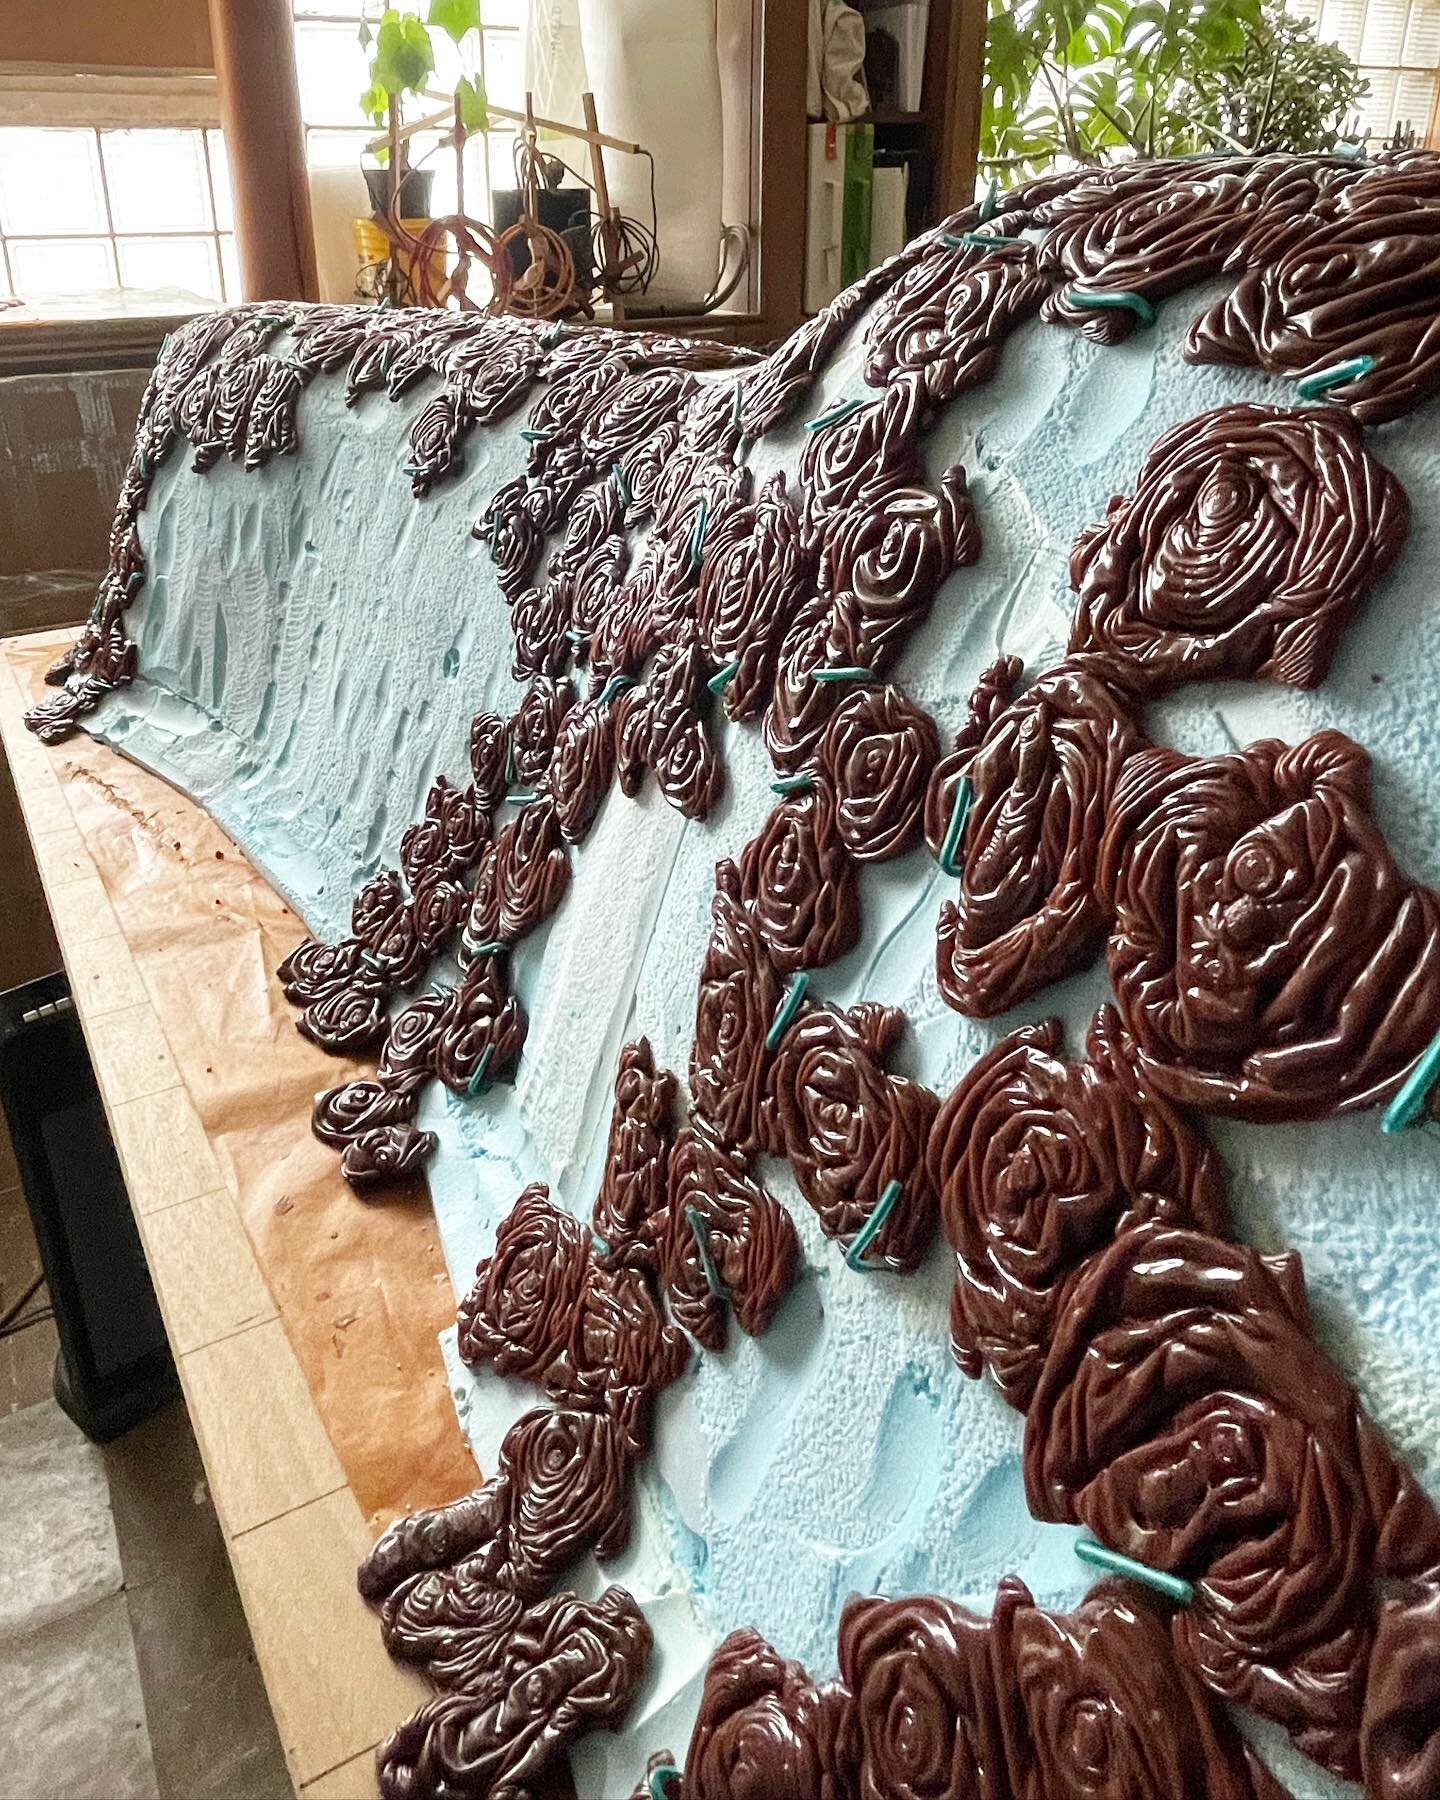 Building the ICB Kudzu Bench at full scale. Each wax element is poured individually onto ice and then portions are assembled over the form. #icecastbronze #icbkudzubench #process #commission #kudzu #haulenbeekstudio